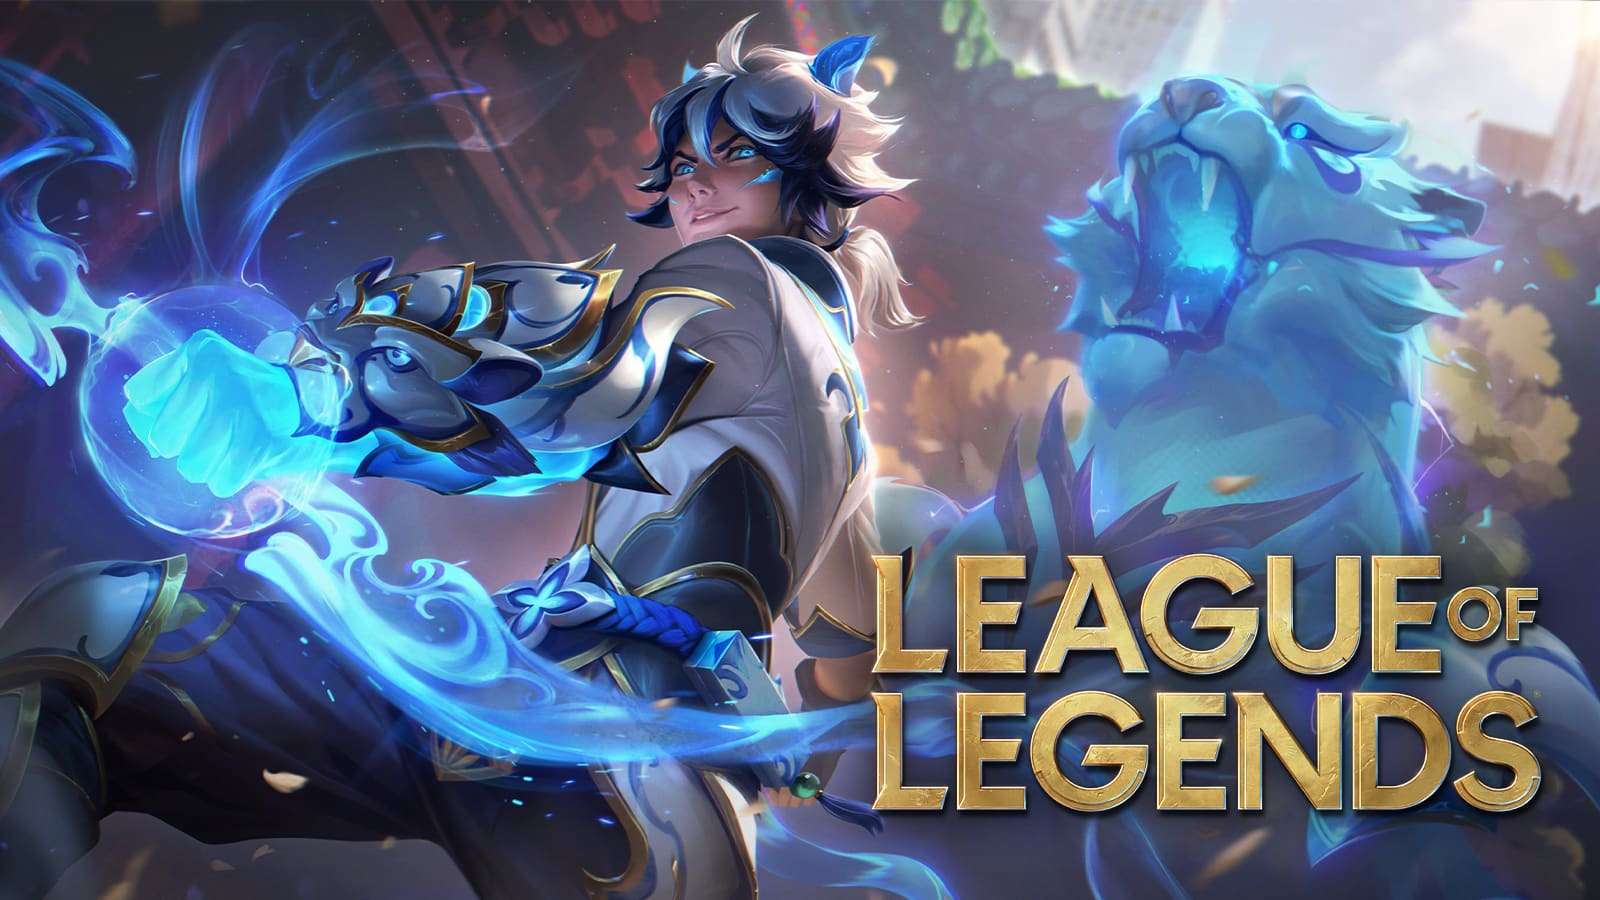 Porcelain Protector Ezreal in League of Legends